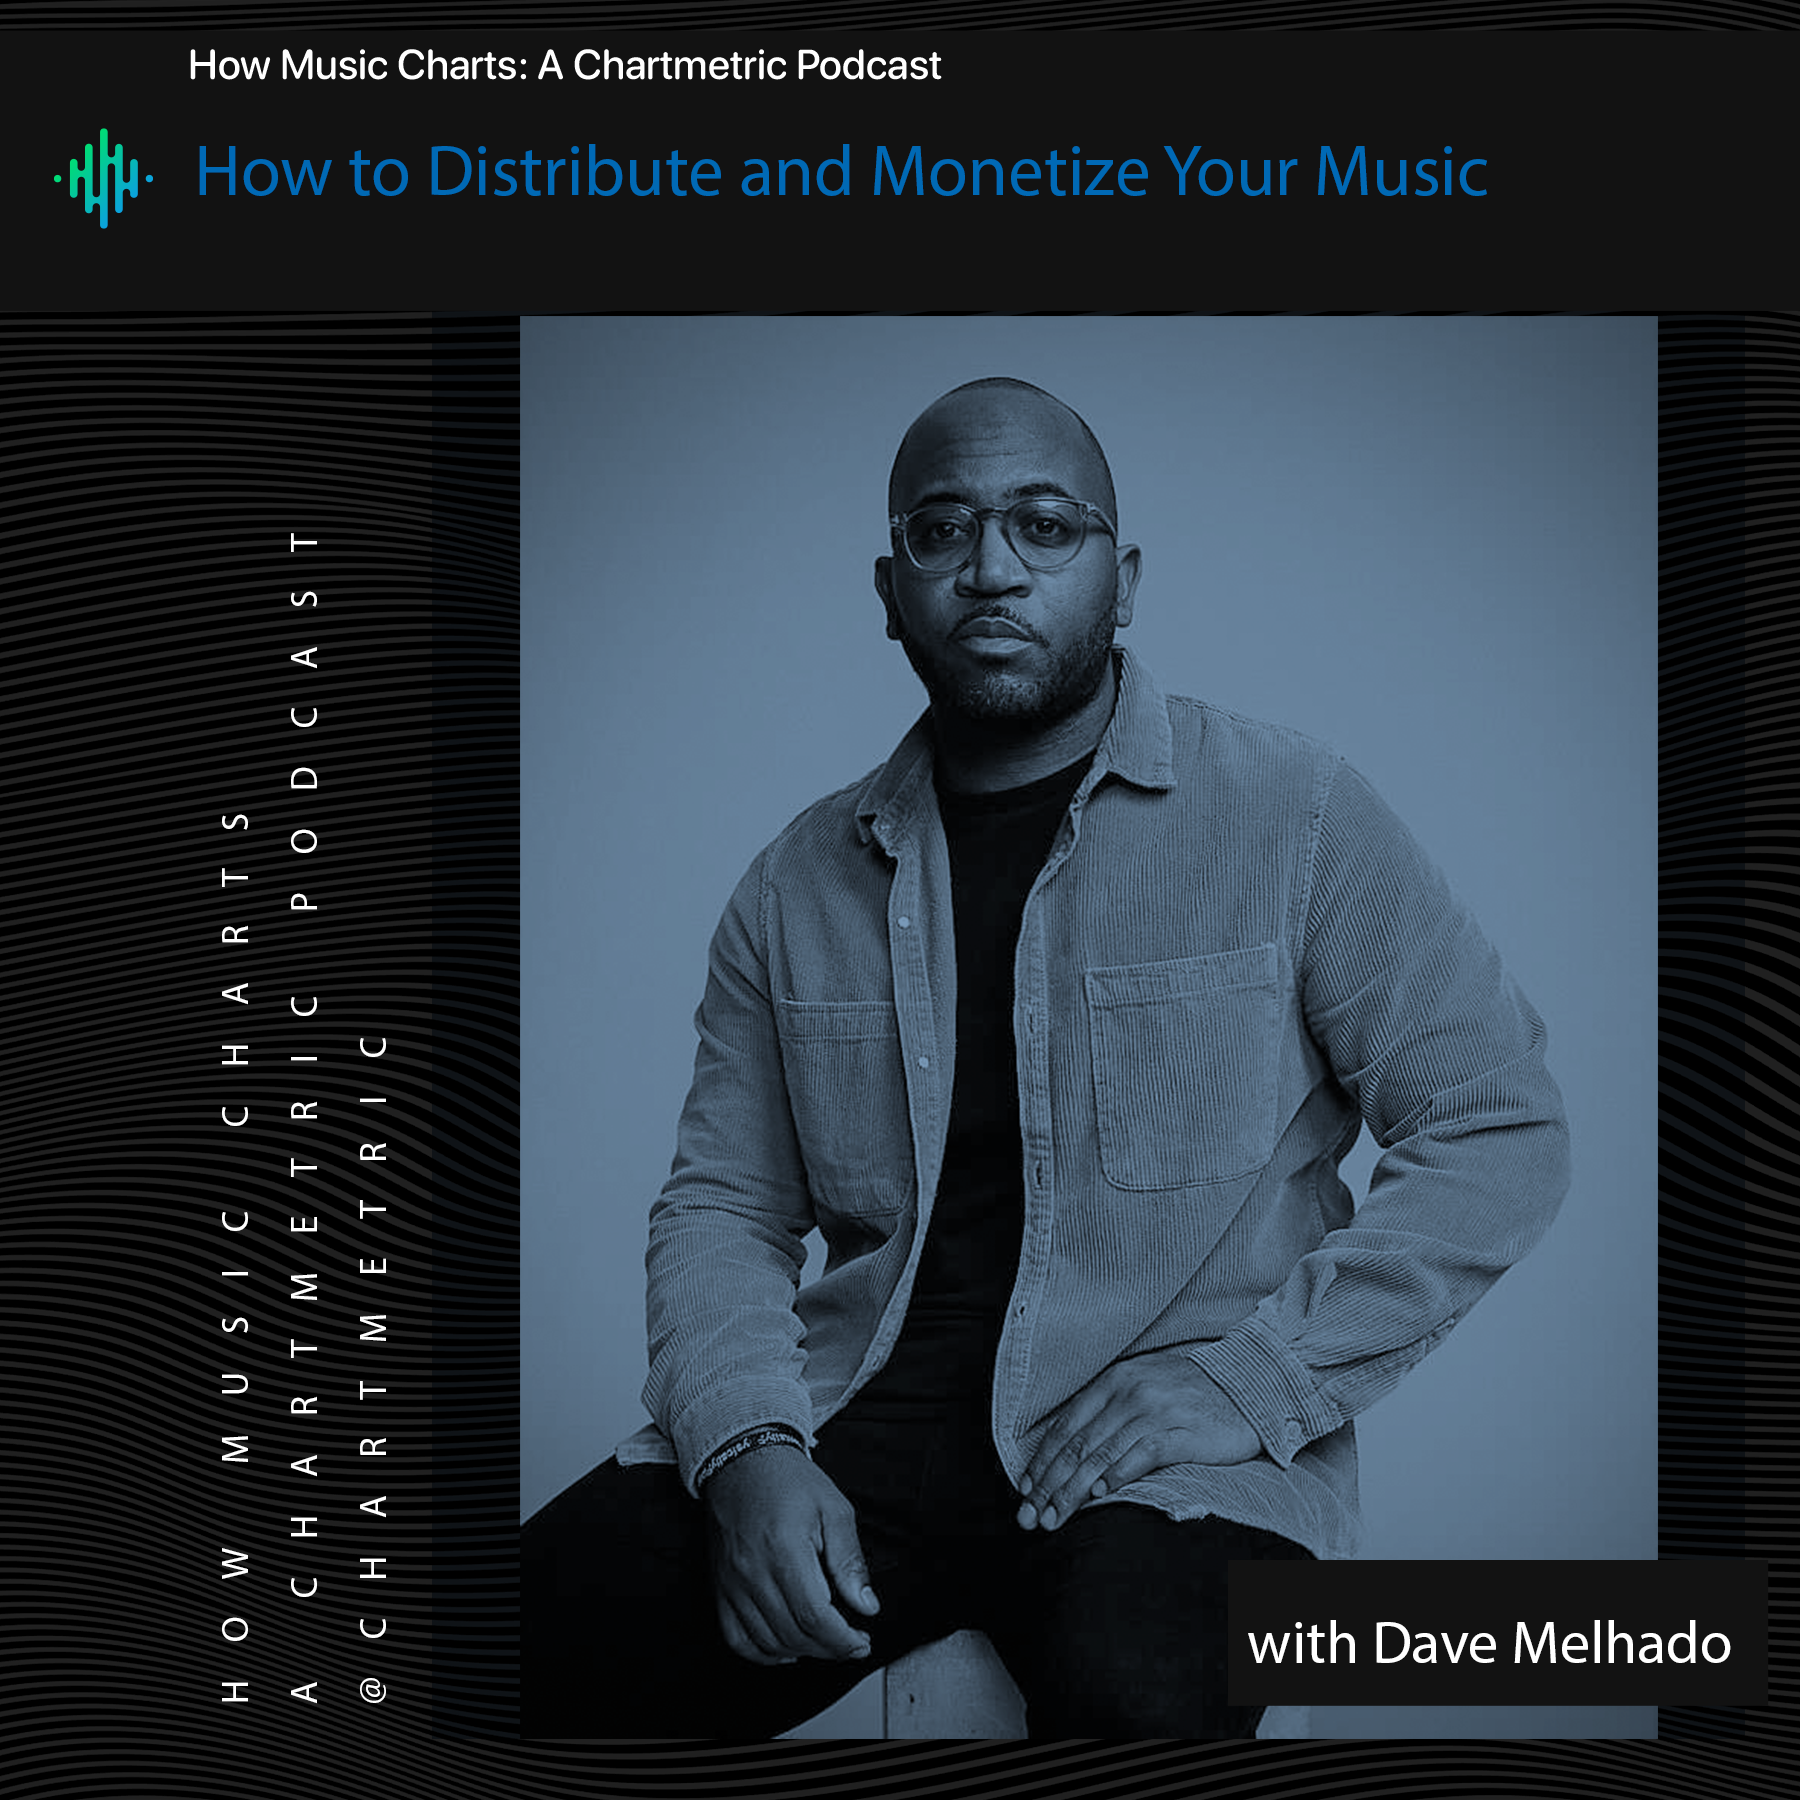 How to Distribute and Monetize Your Music With Dave Melhado